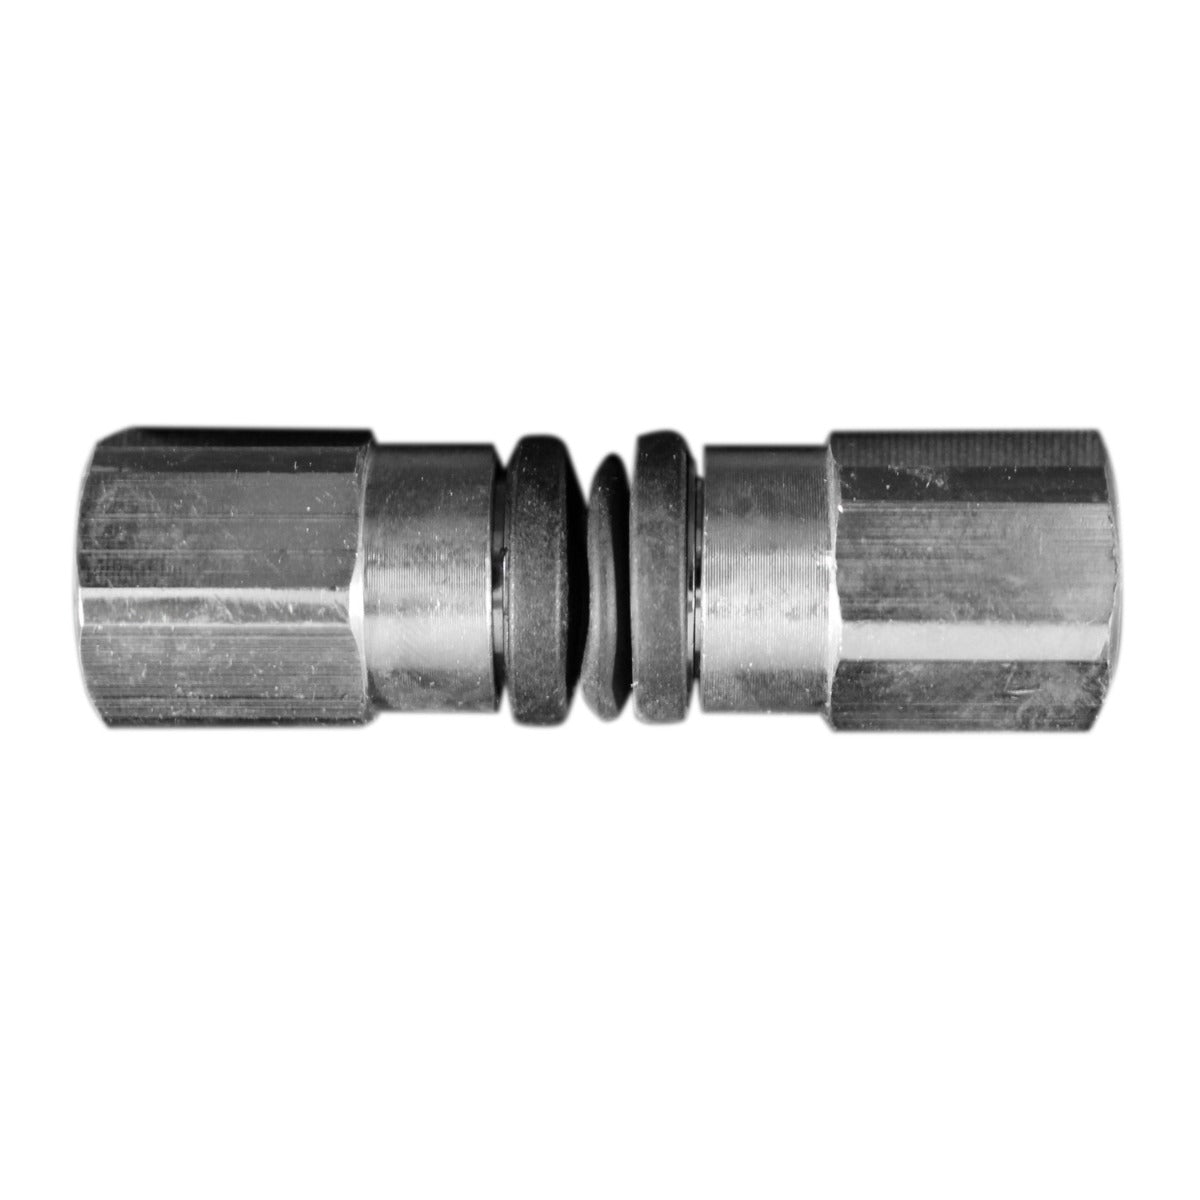 Variable Angle Swivel Fitting